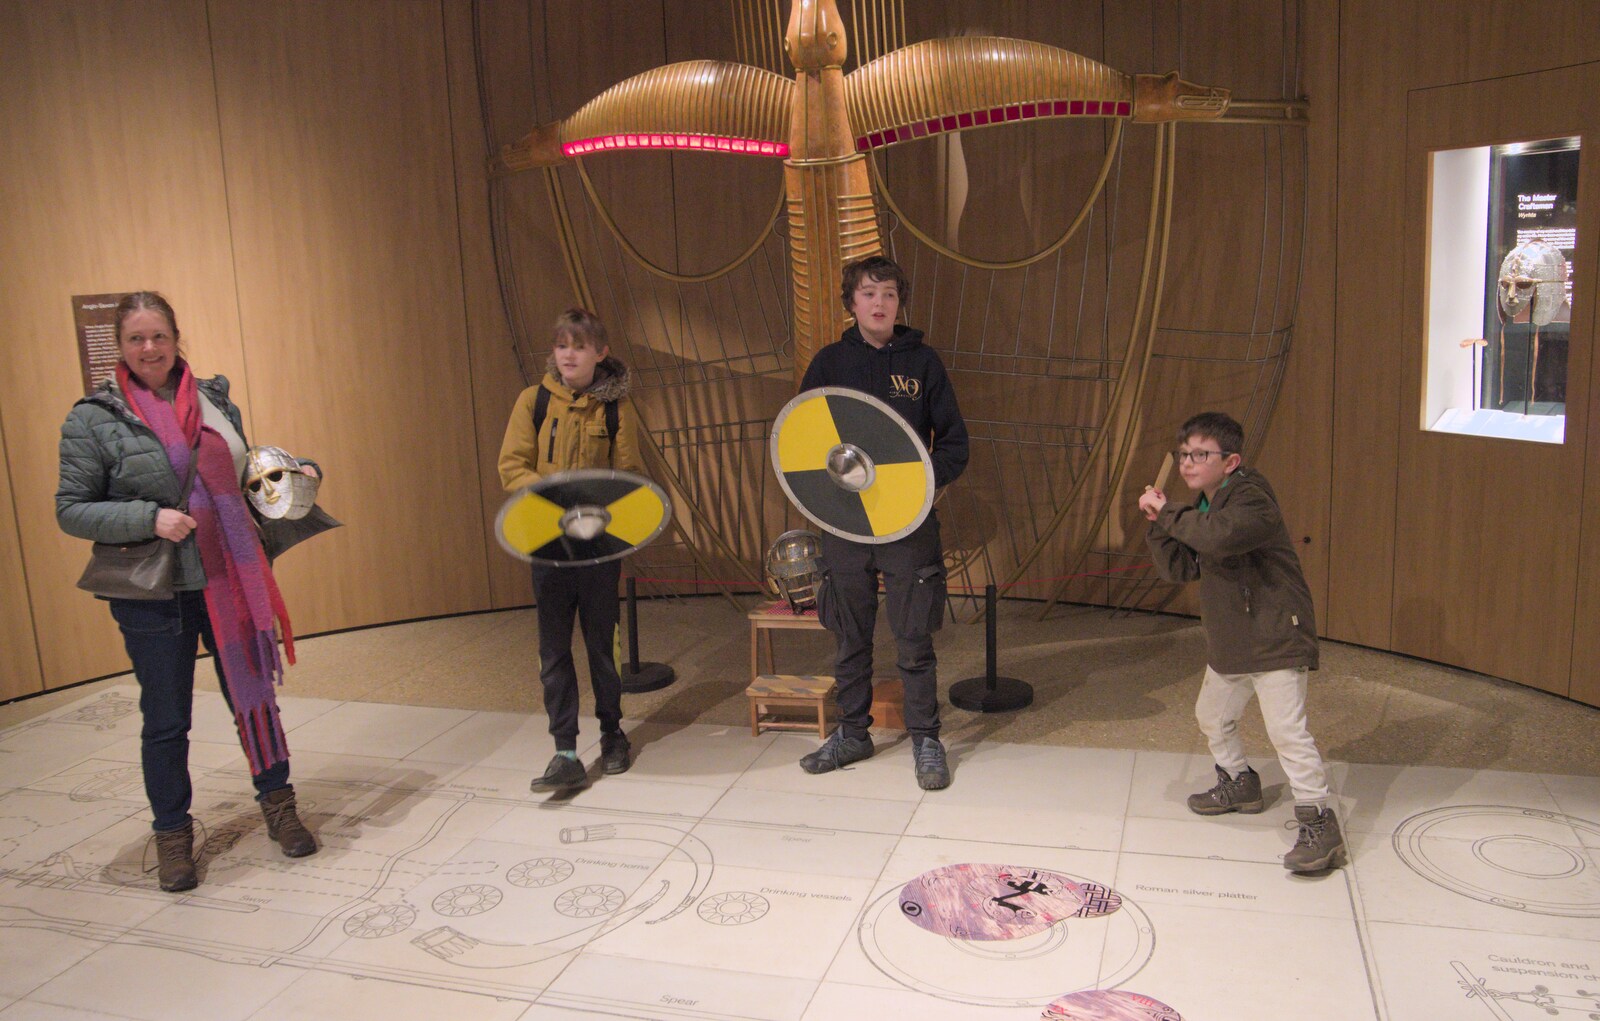 The lad from the other team waves a dagger around from Riddlequest at Sutton Hoo, Woodbridge, Suffolk - 23rd February 2024